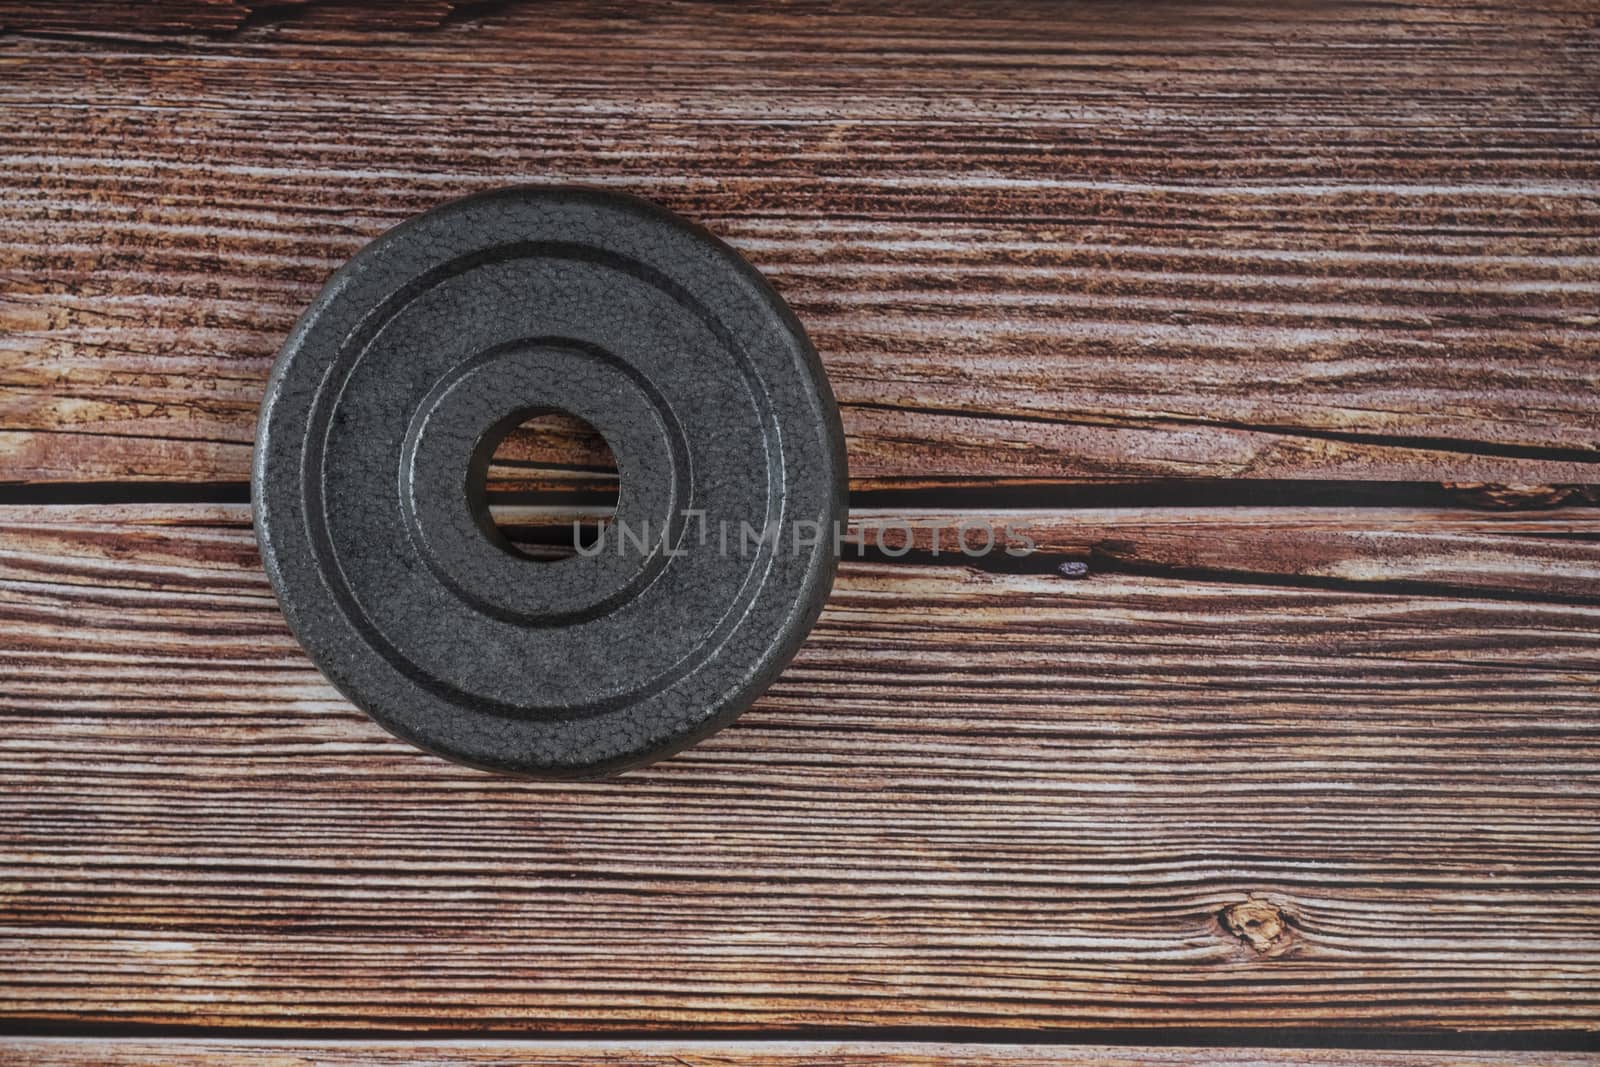 A metal weight plate on brown wooden background.